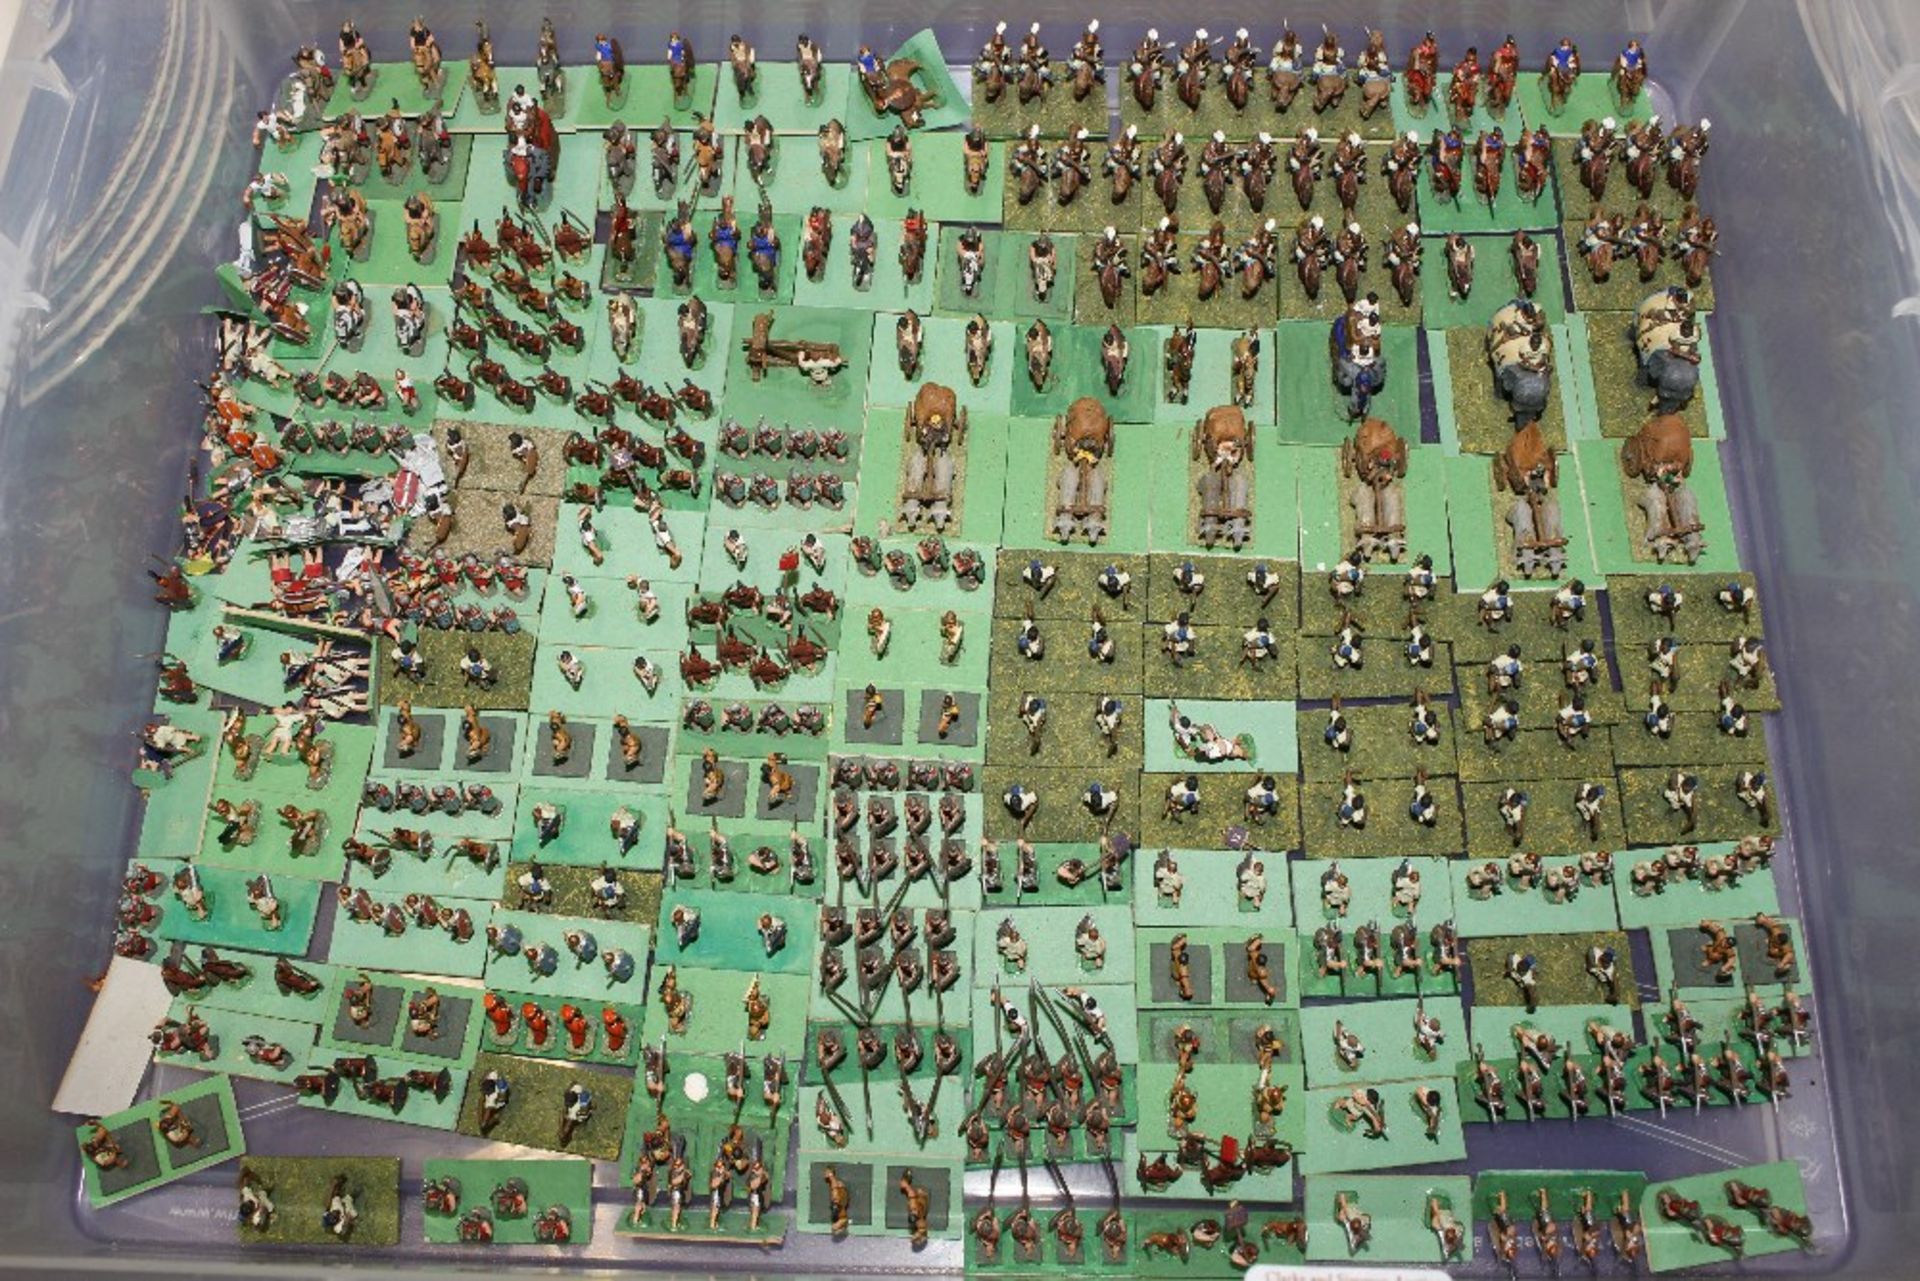 A box of 15mm Wargame figures for the Franco Pruss